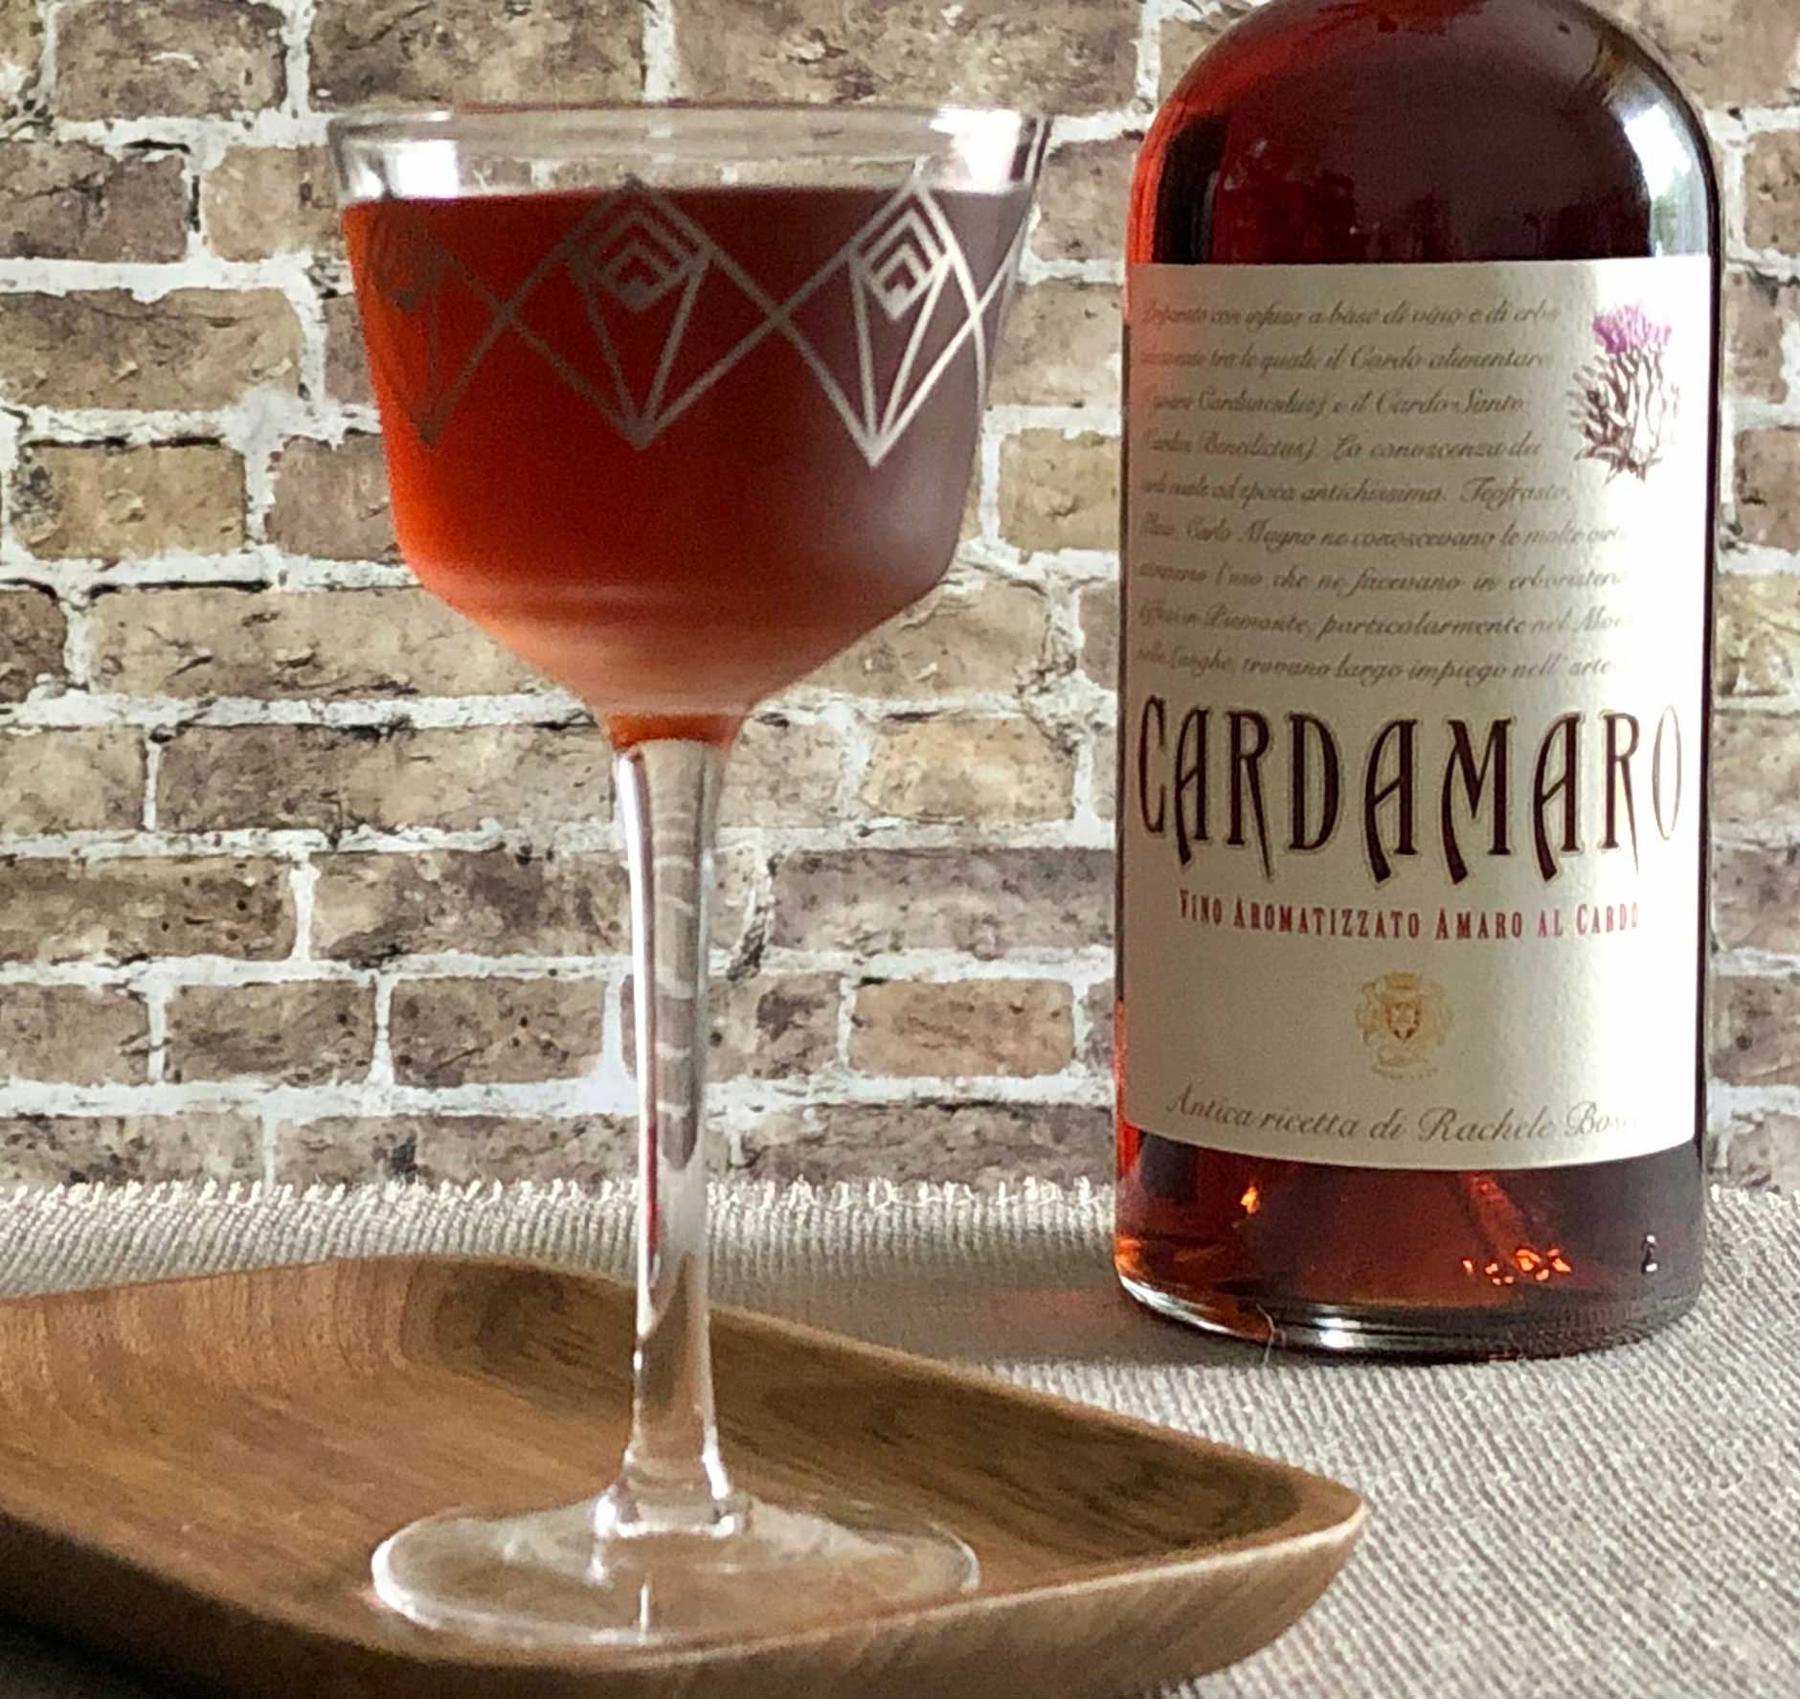 An example of the Careful Whisper, the mixed drink (drink), variation on the Whisper, Savoy Cocktail Book, featuring Cardamaro Vino Amaro, Dolin Dry Vermouth de Chambéry, Cocchi Vermouth di Torino ‘Storico’, orange bitters, and Angostura bitters; photo by Lee Edwards